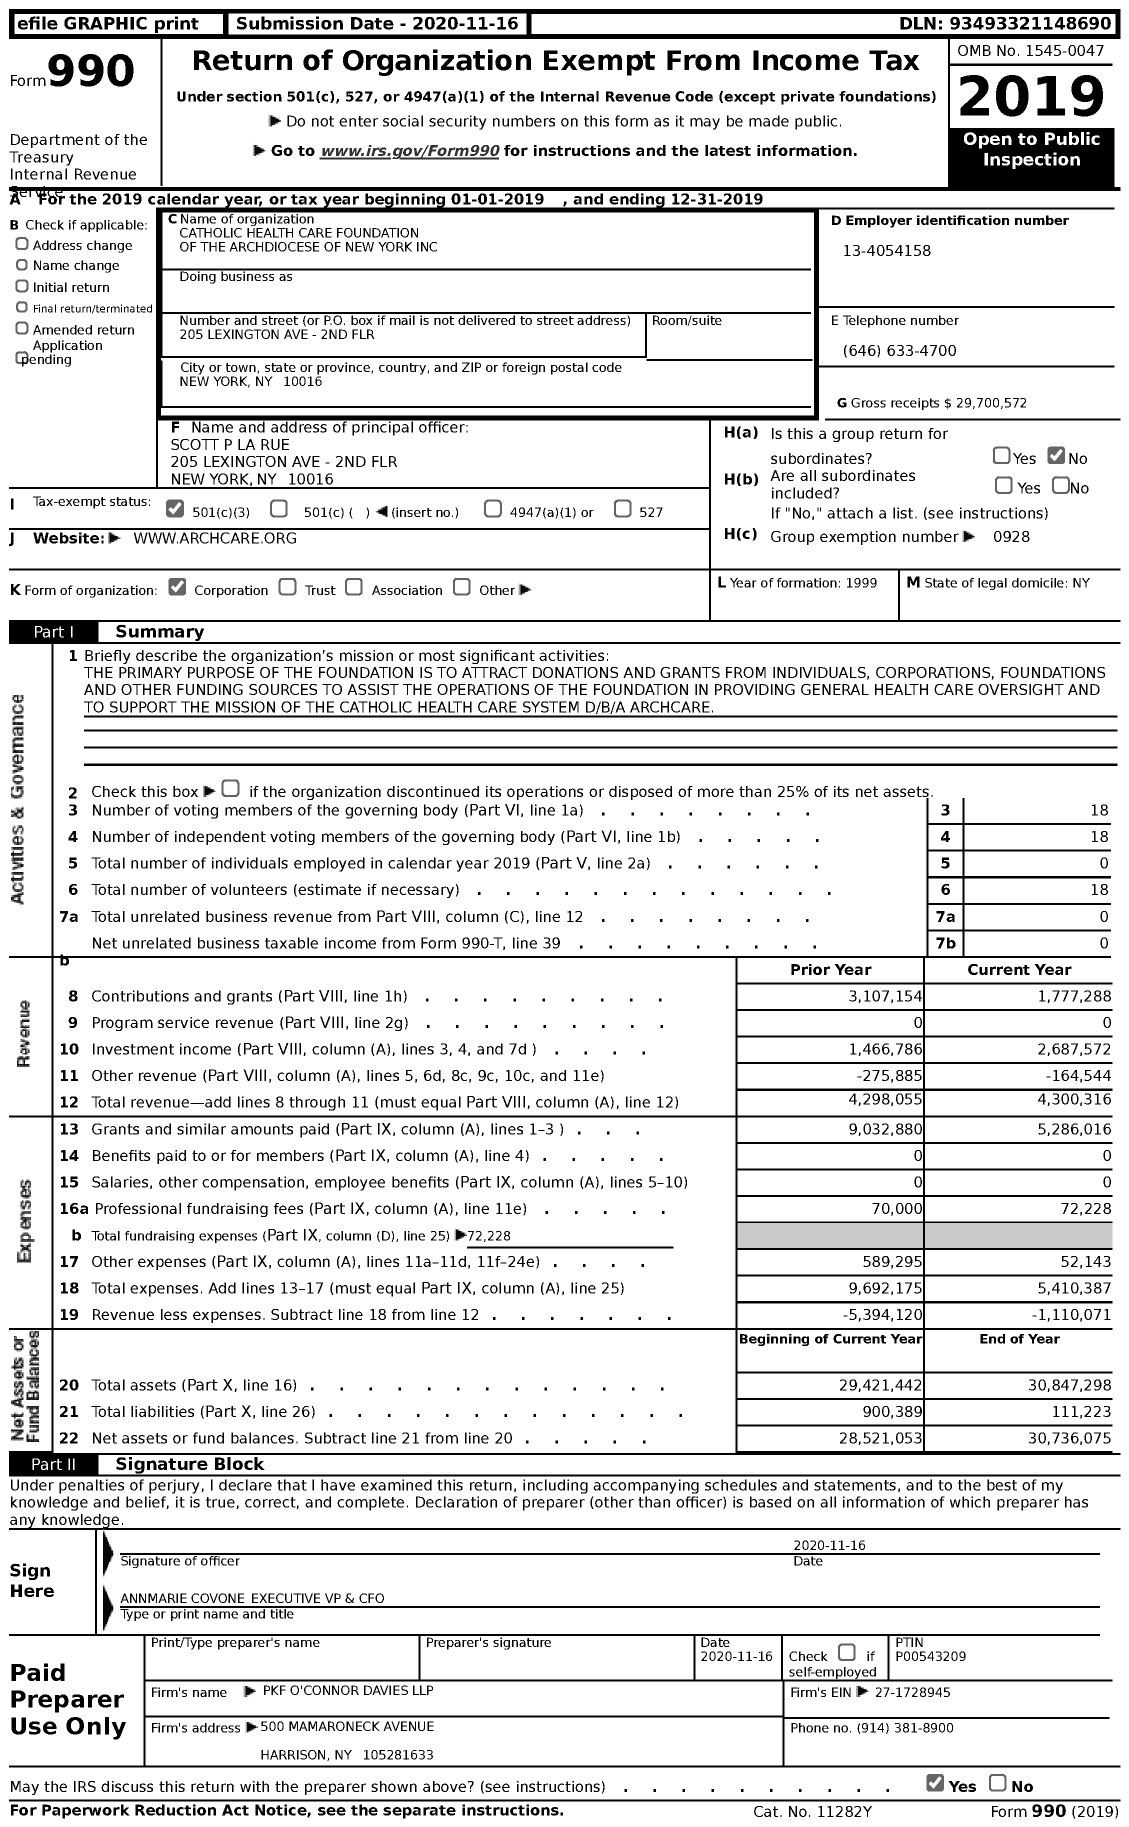 Image of first page of 2019 Form 990 for Catholic Health Care Foundation of the Archdiocese of New York